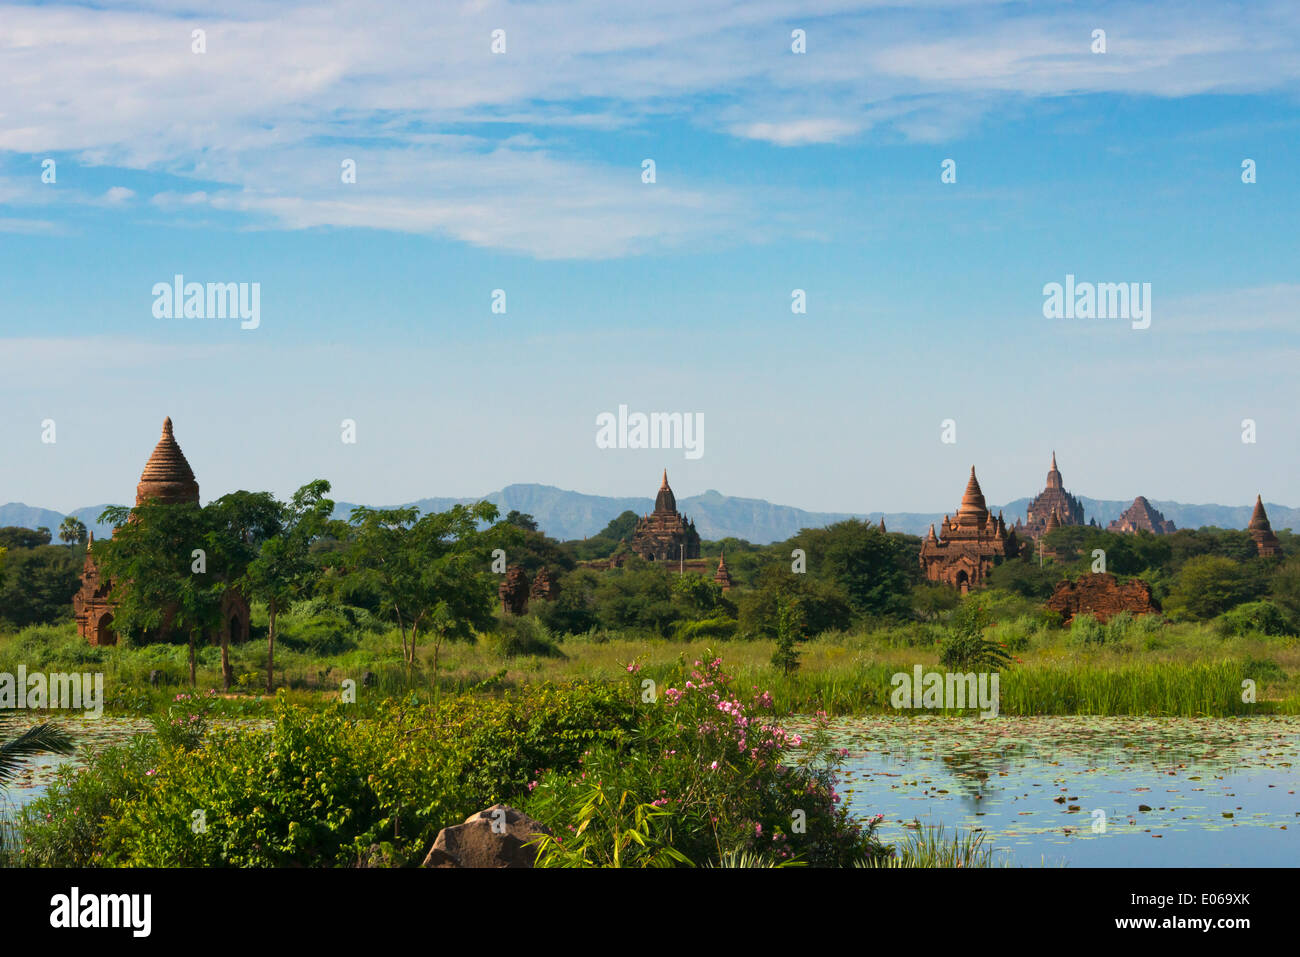 Ancient temples and pagodas with pond, Bagan, Myanmar Stock Photo